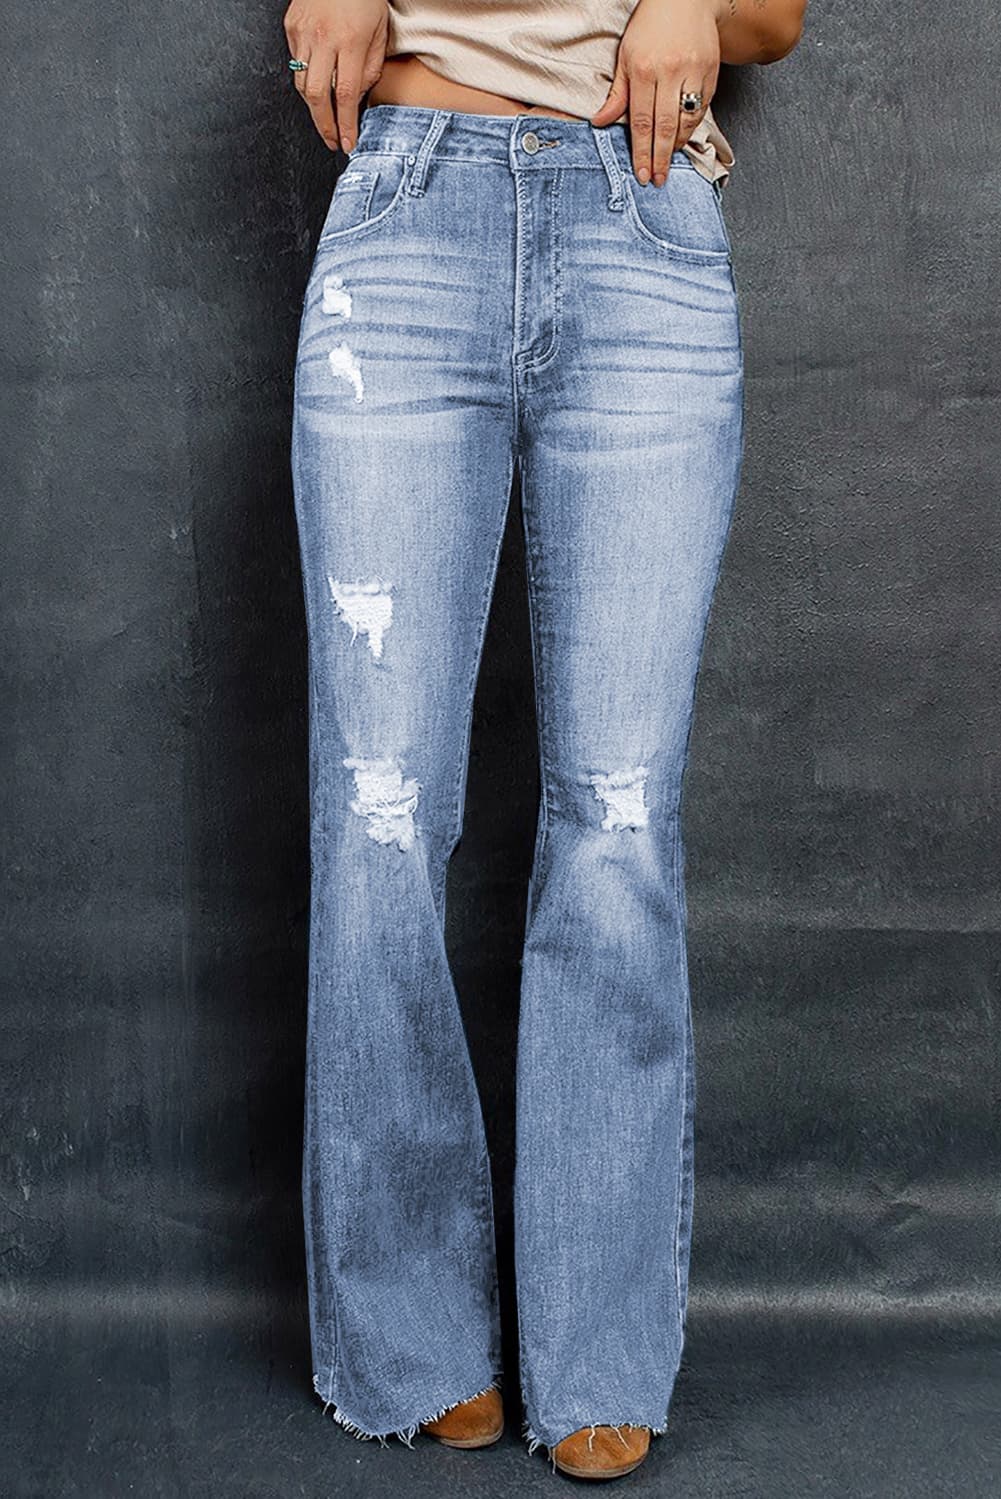 The802Gypsy Bottoms Light / 4 Gypsy Daisy Distressed Flare Jeans